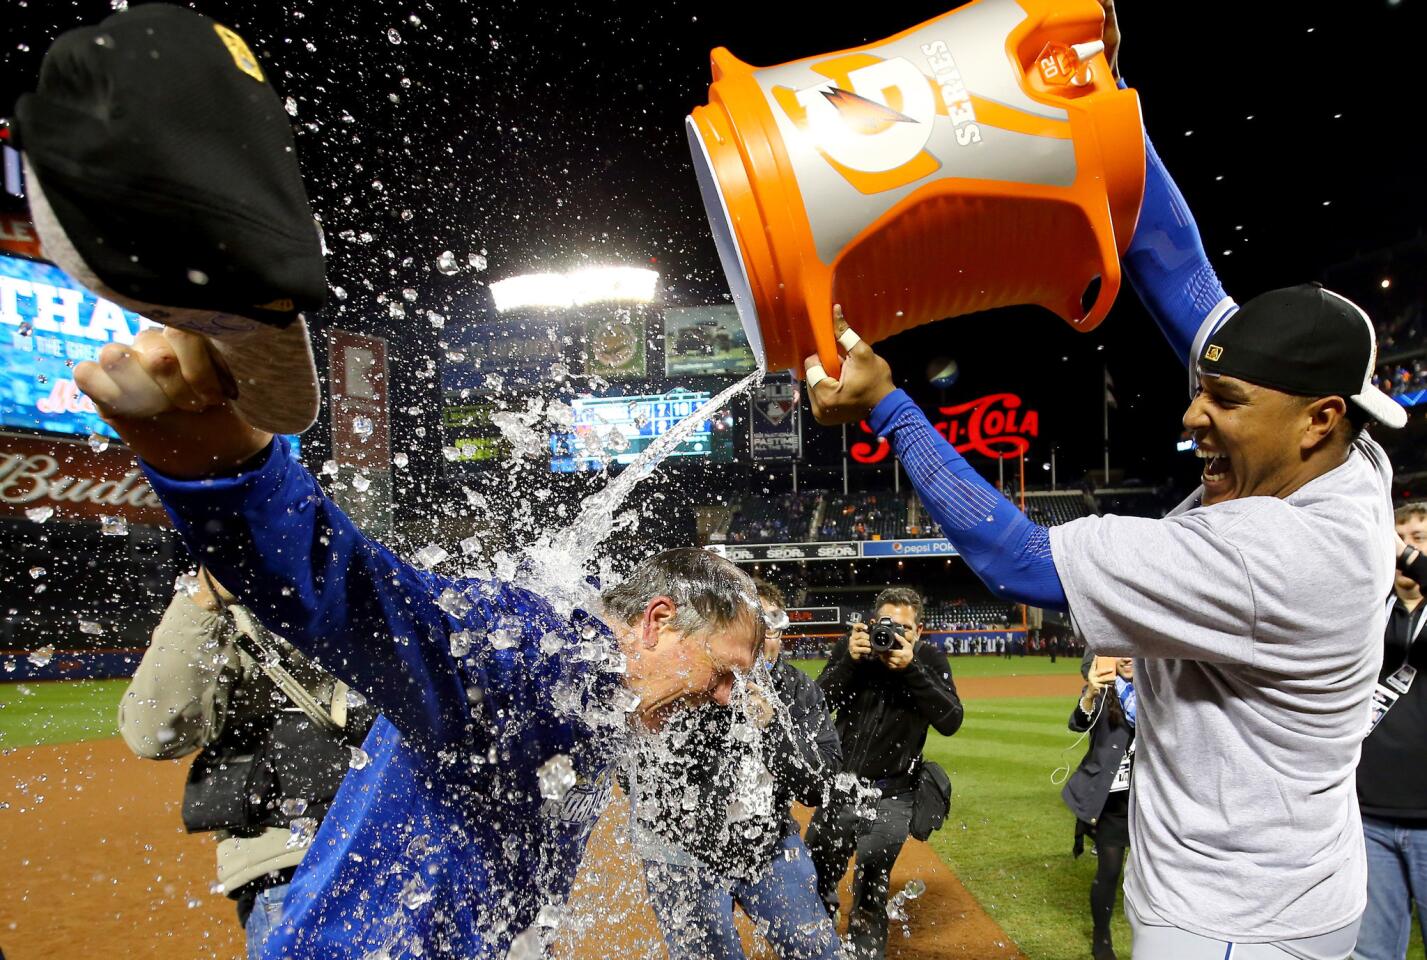 Catcher Salvador Perez douses Manager Ned Yost as the Royals celebrate their World Series title.